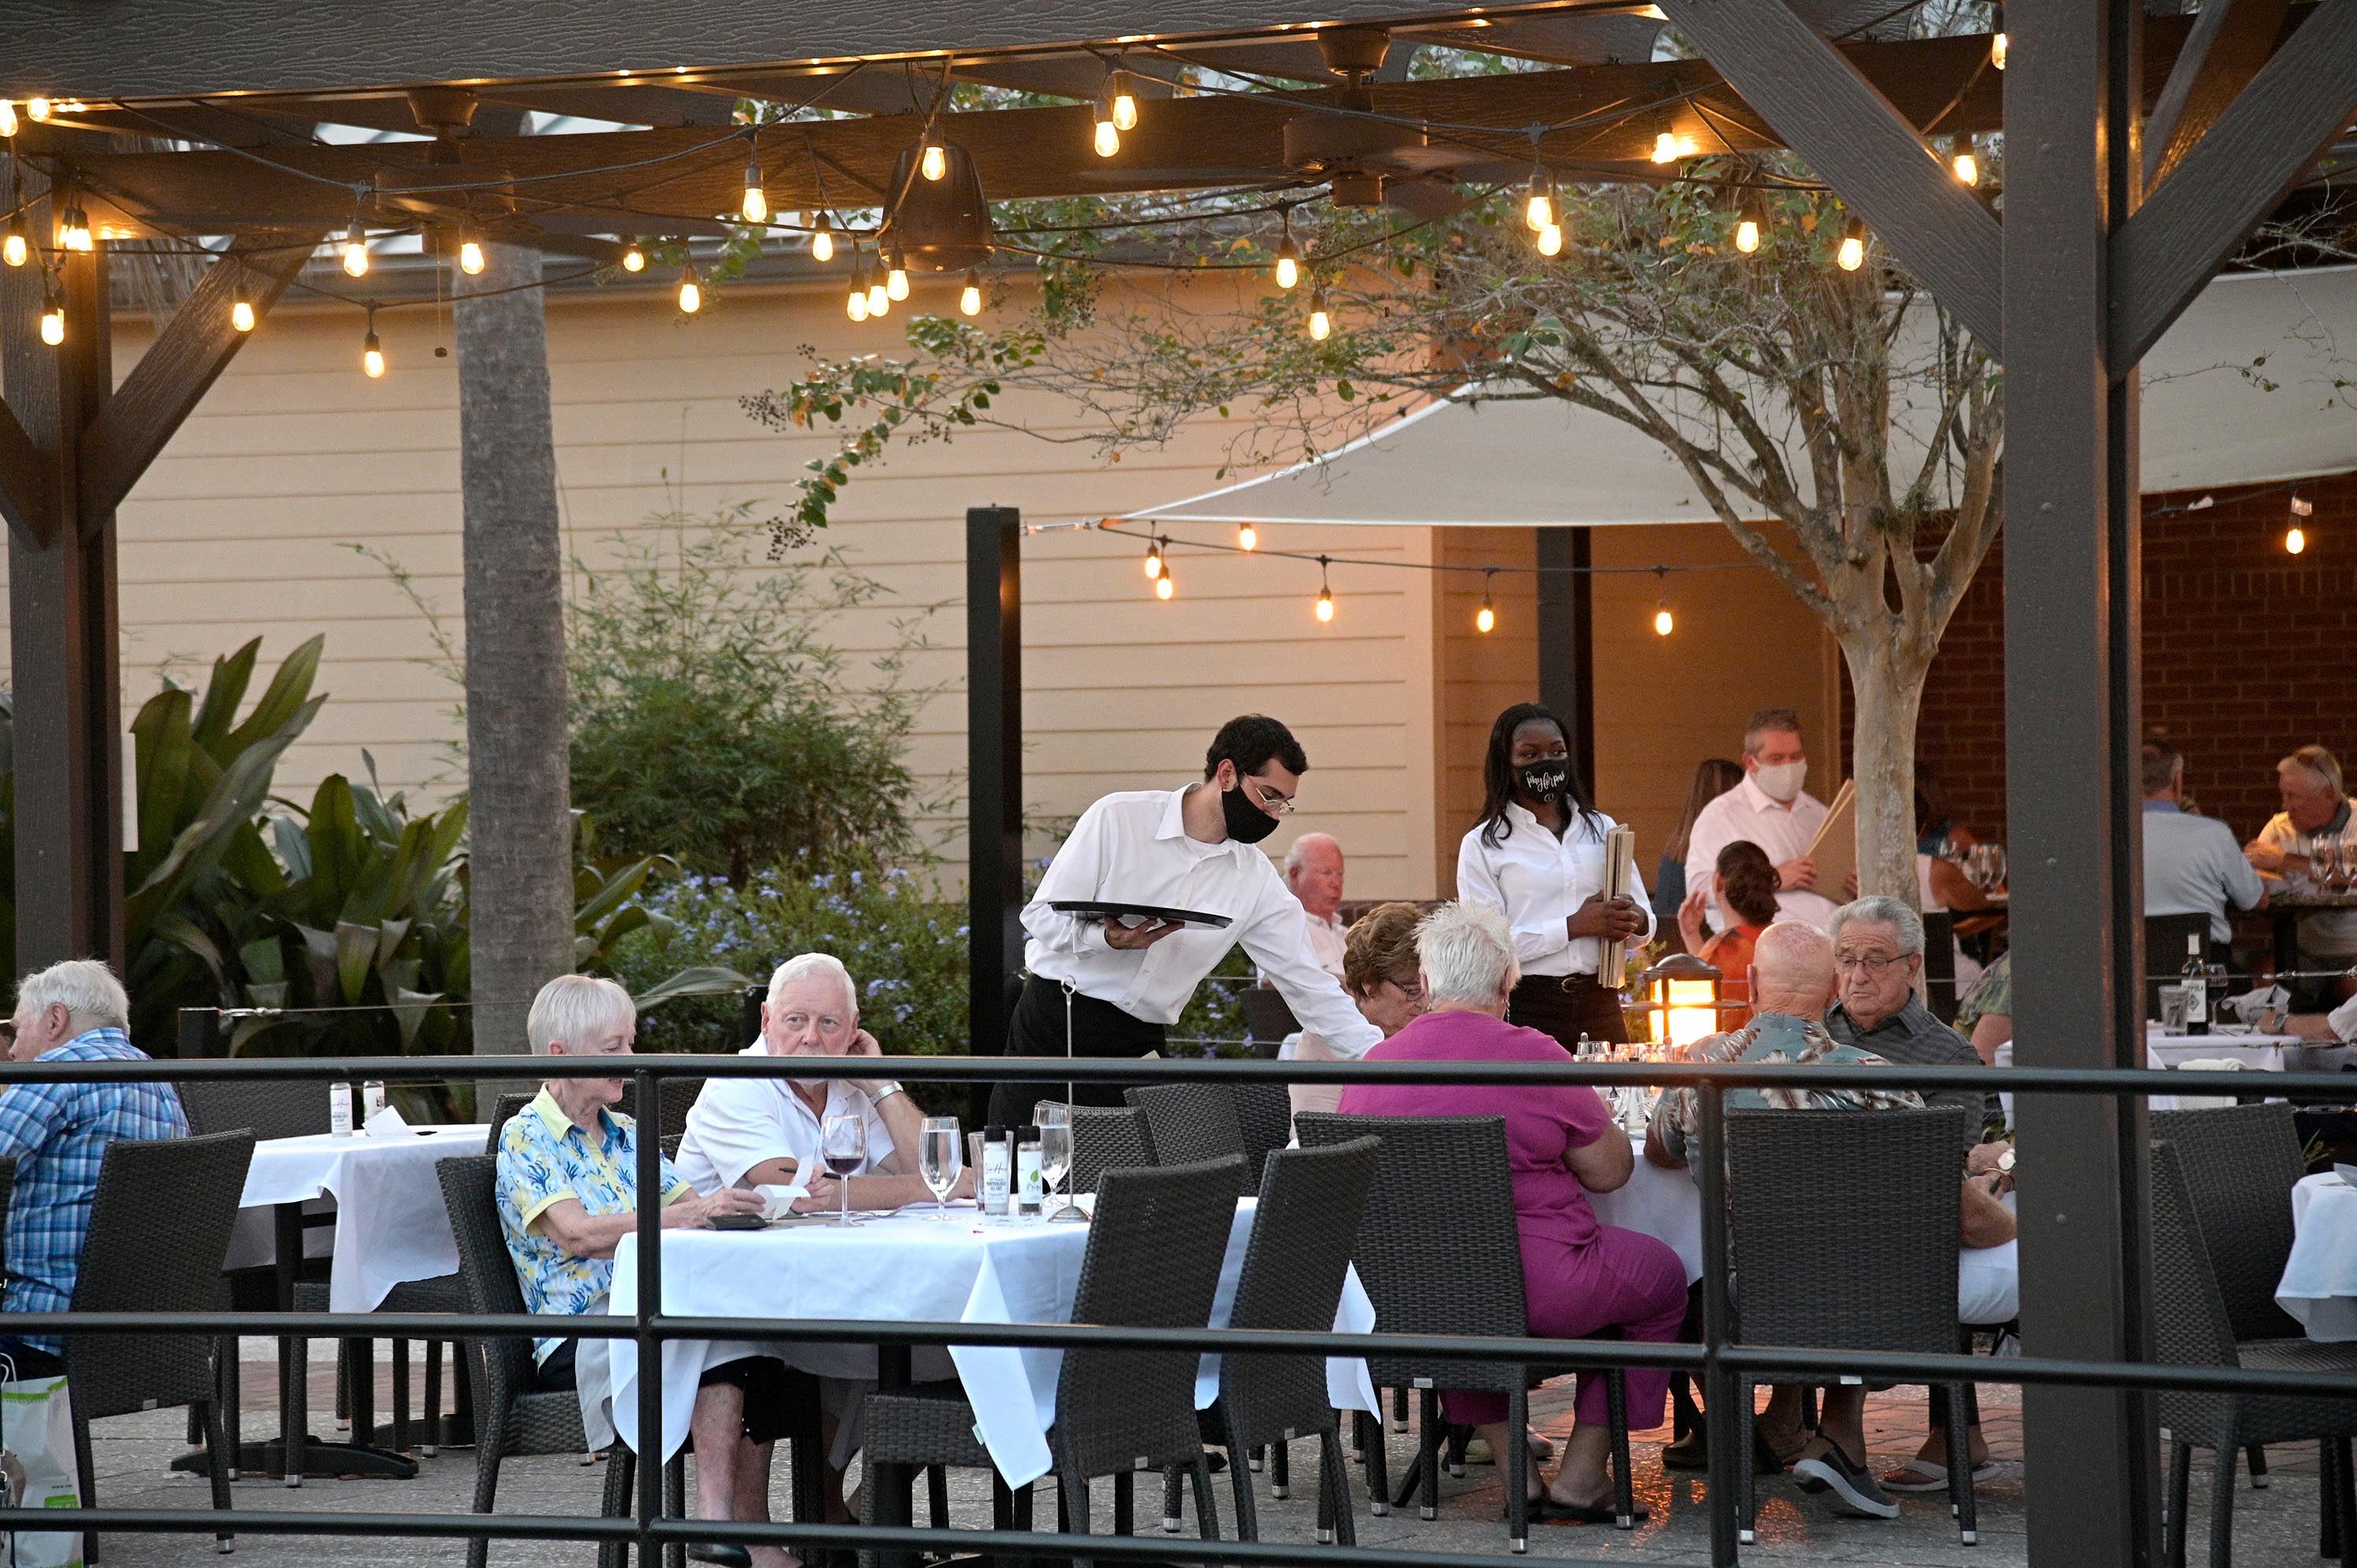 People dine at a restaurant in The Villages, Florida, in October 2020.